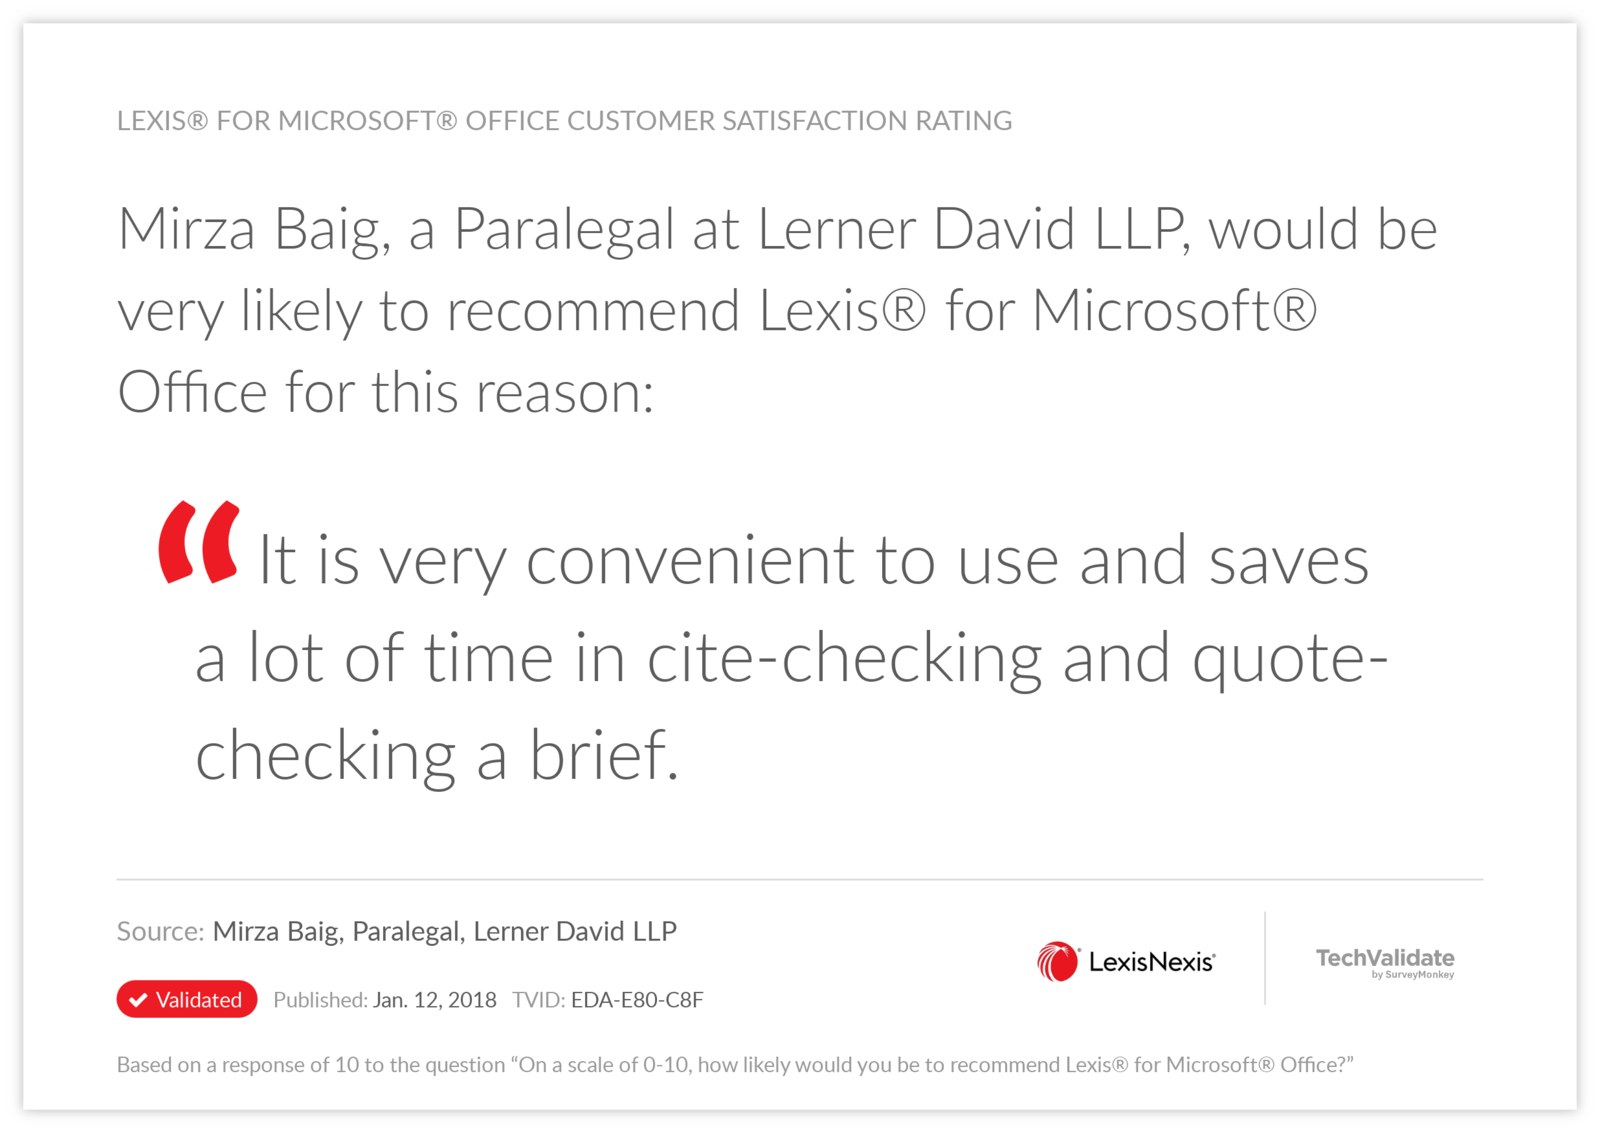 Lexis® for Microsoft® Office Customer Satisfaction Rating